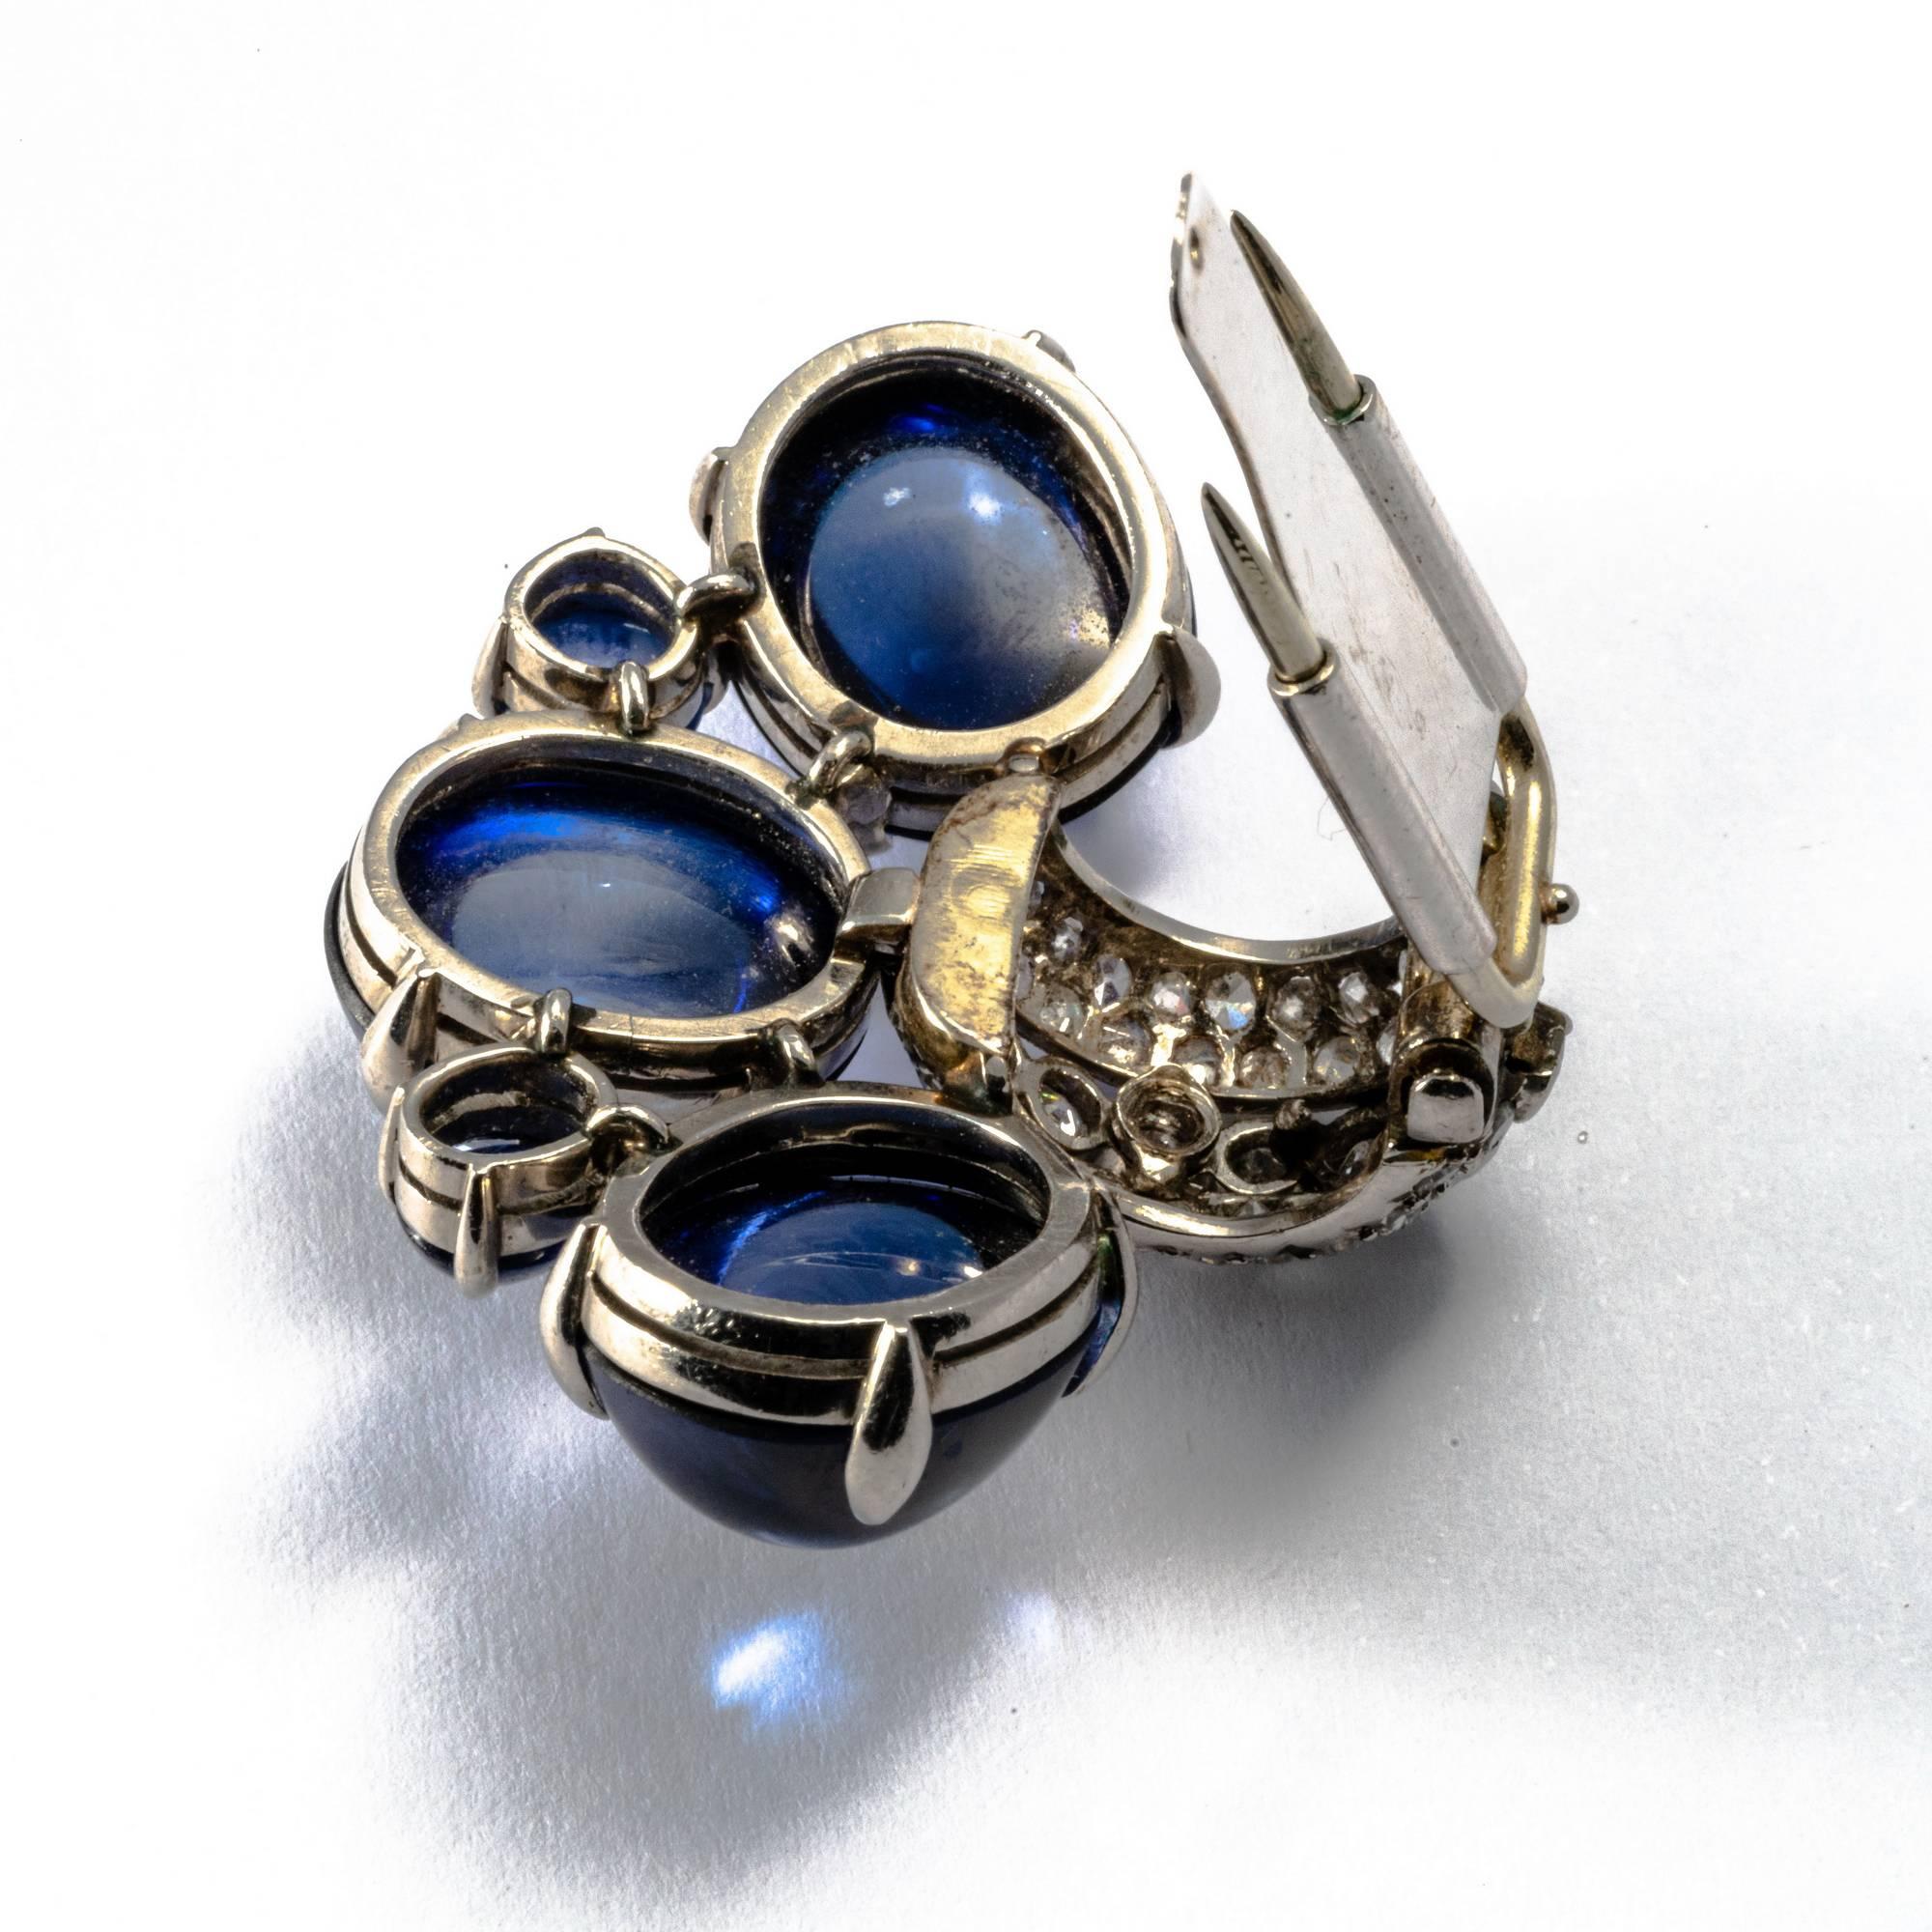 1980-1990 Cabochon Diamond and Sapphire 18K Gold Set Earrings and Pin Brooch For Sale 2